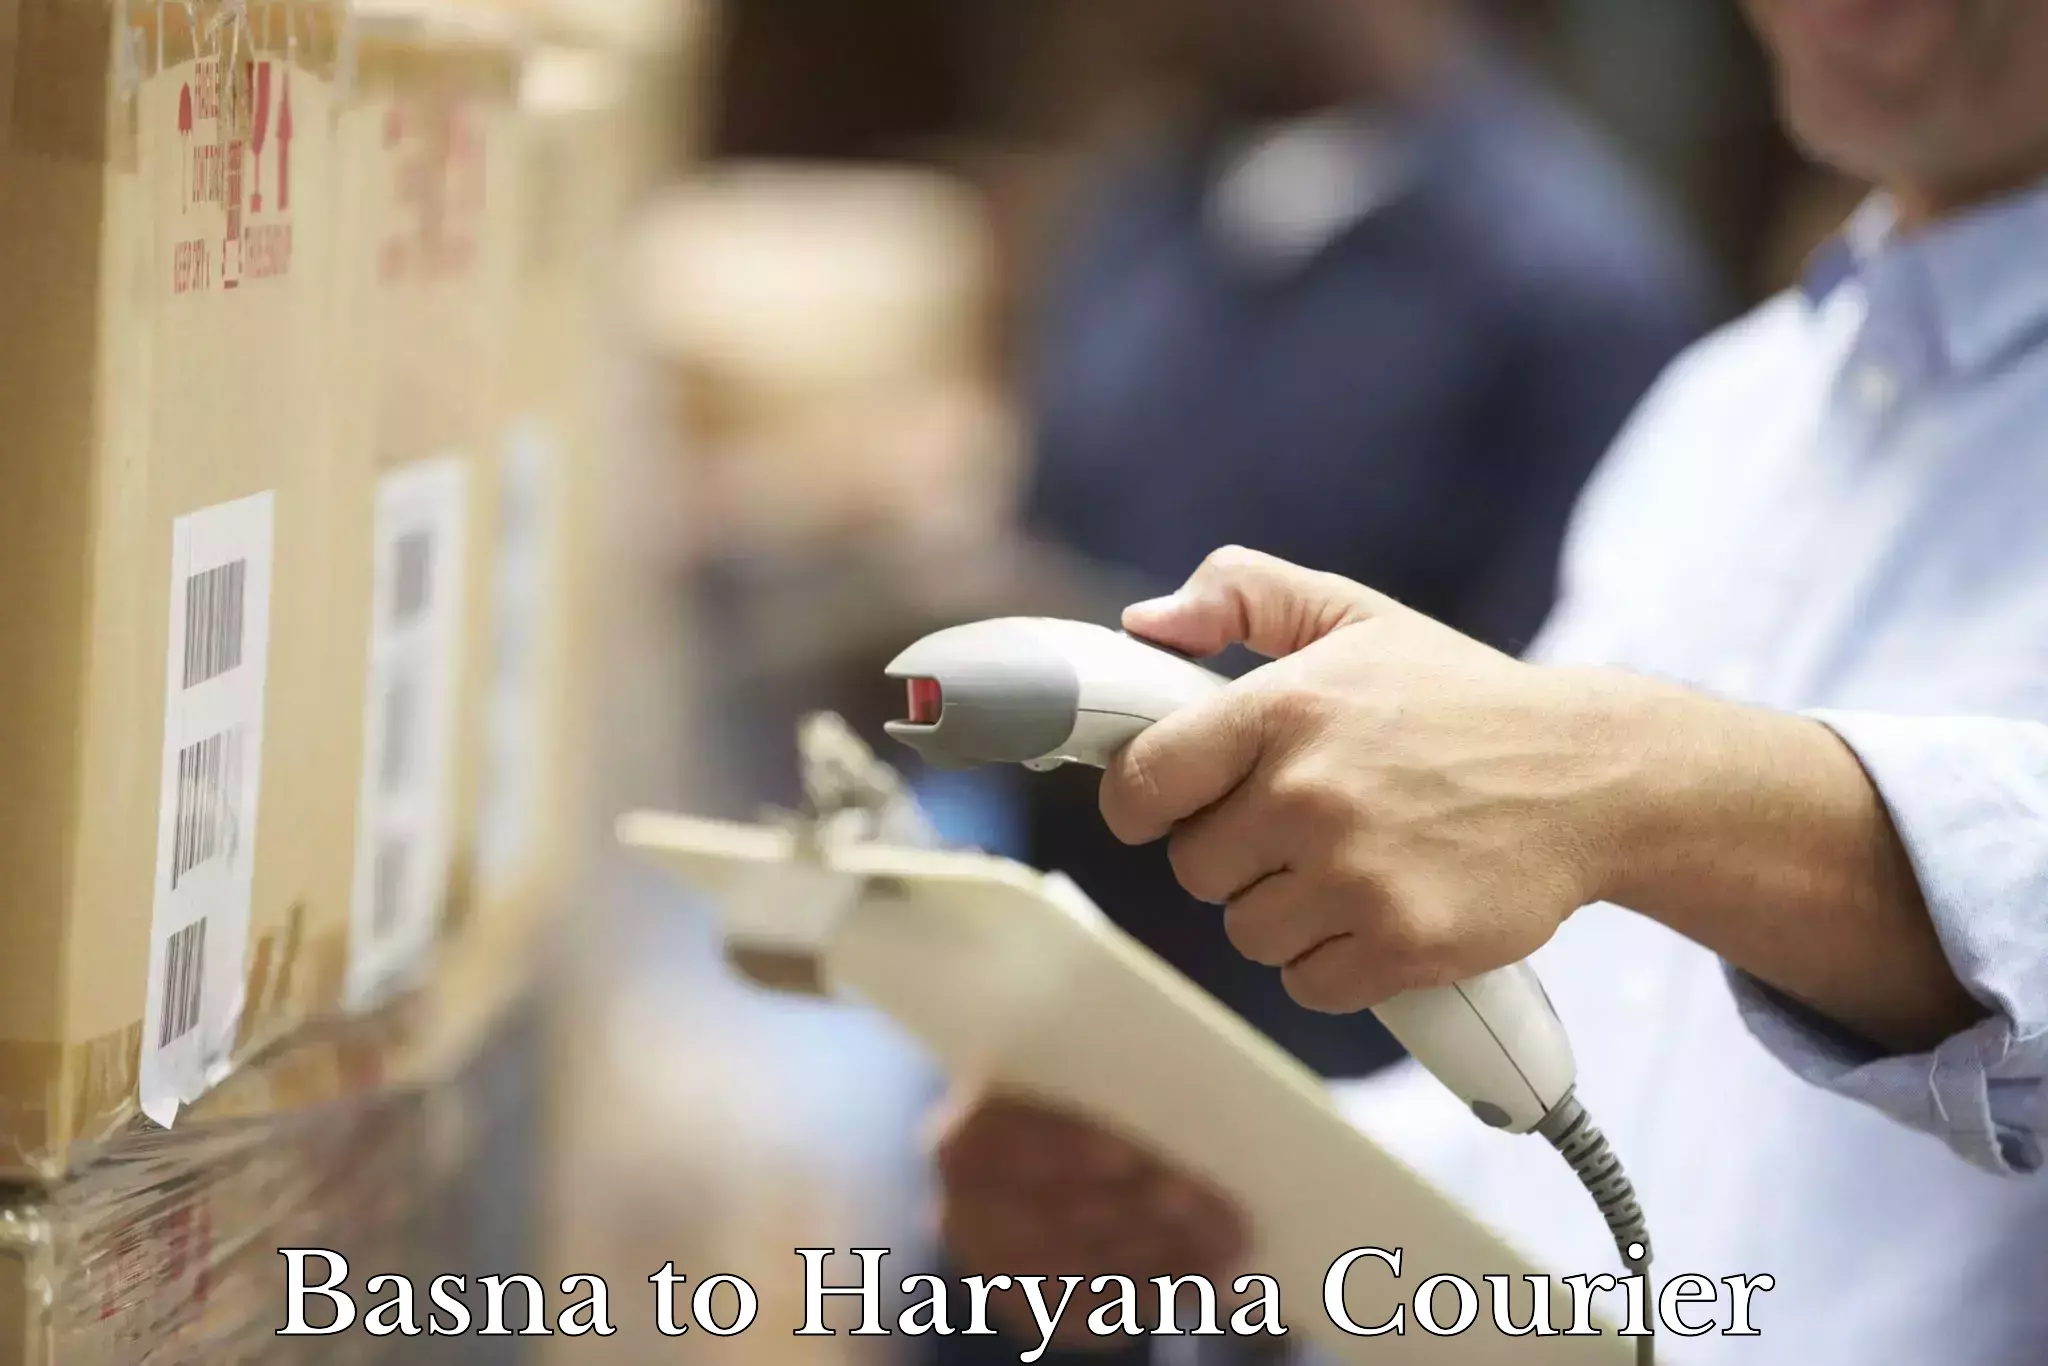 Reliable courier service in Basna to Fatehabad